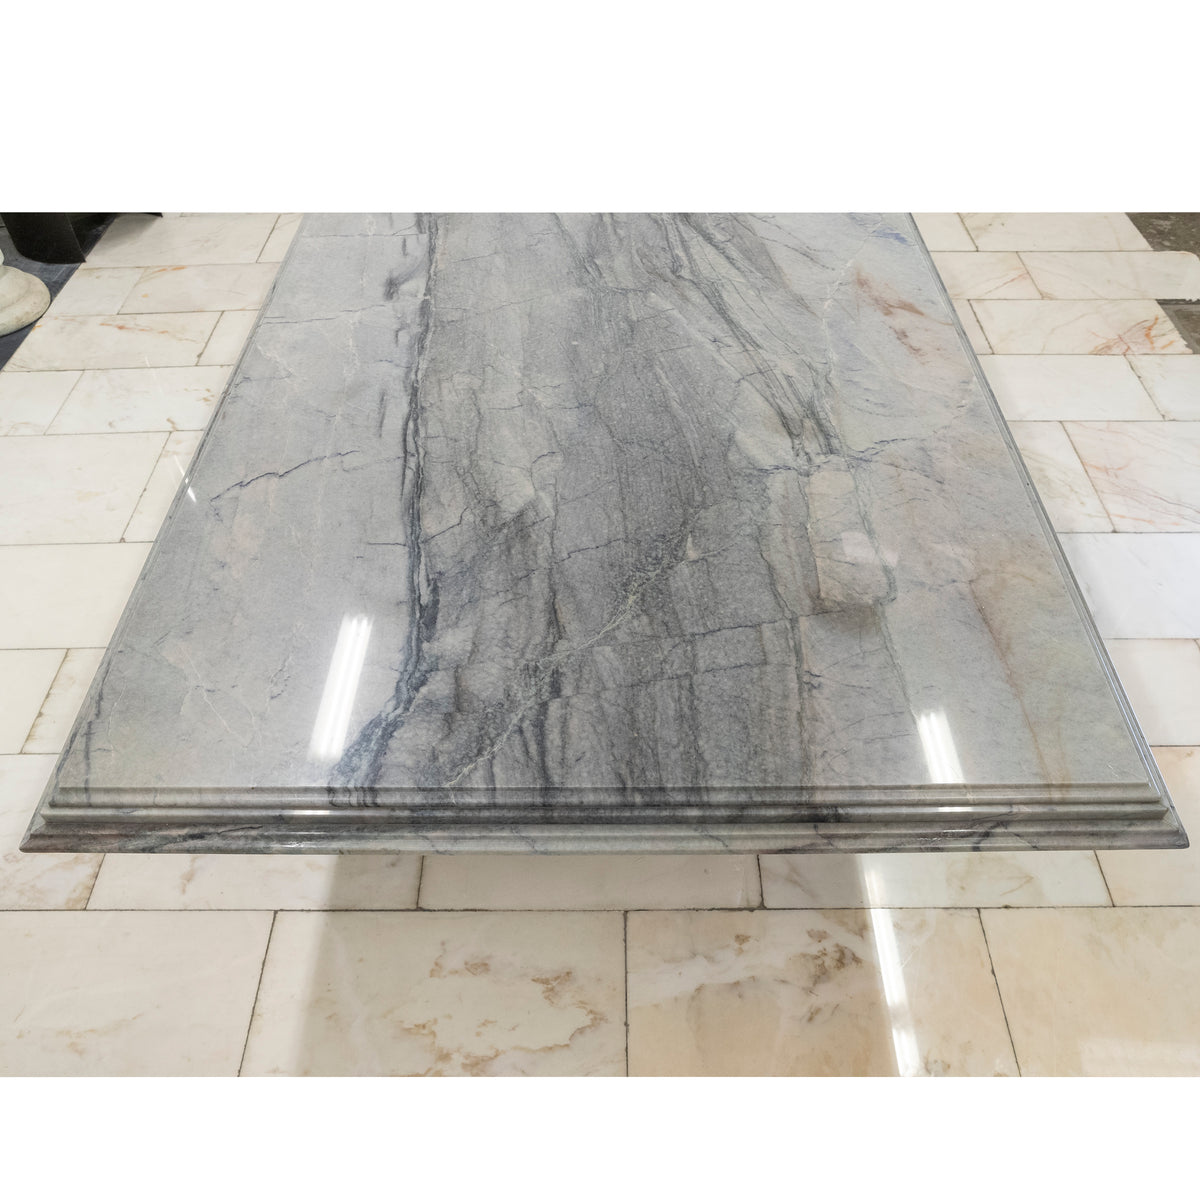 Reclaimed Grand Marble Top Banquet Table with Stone Plinths | The Architectural Forum